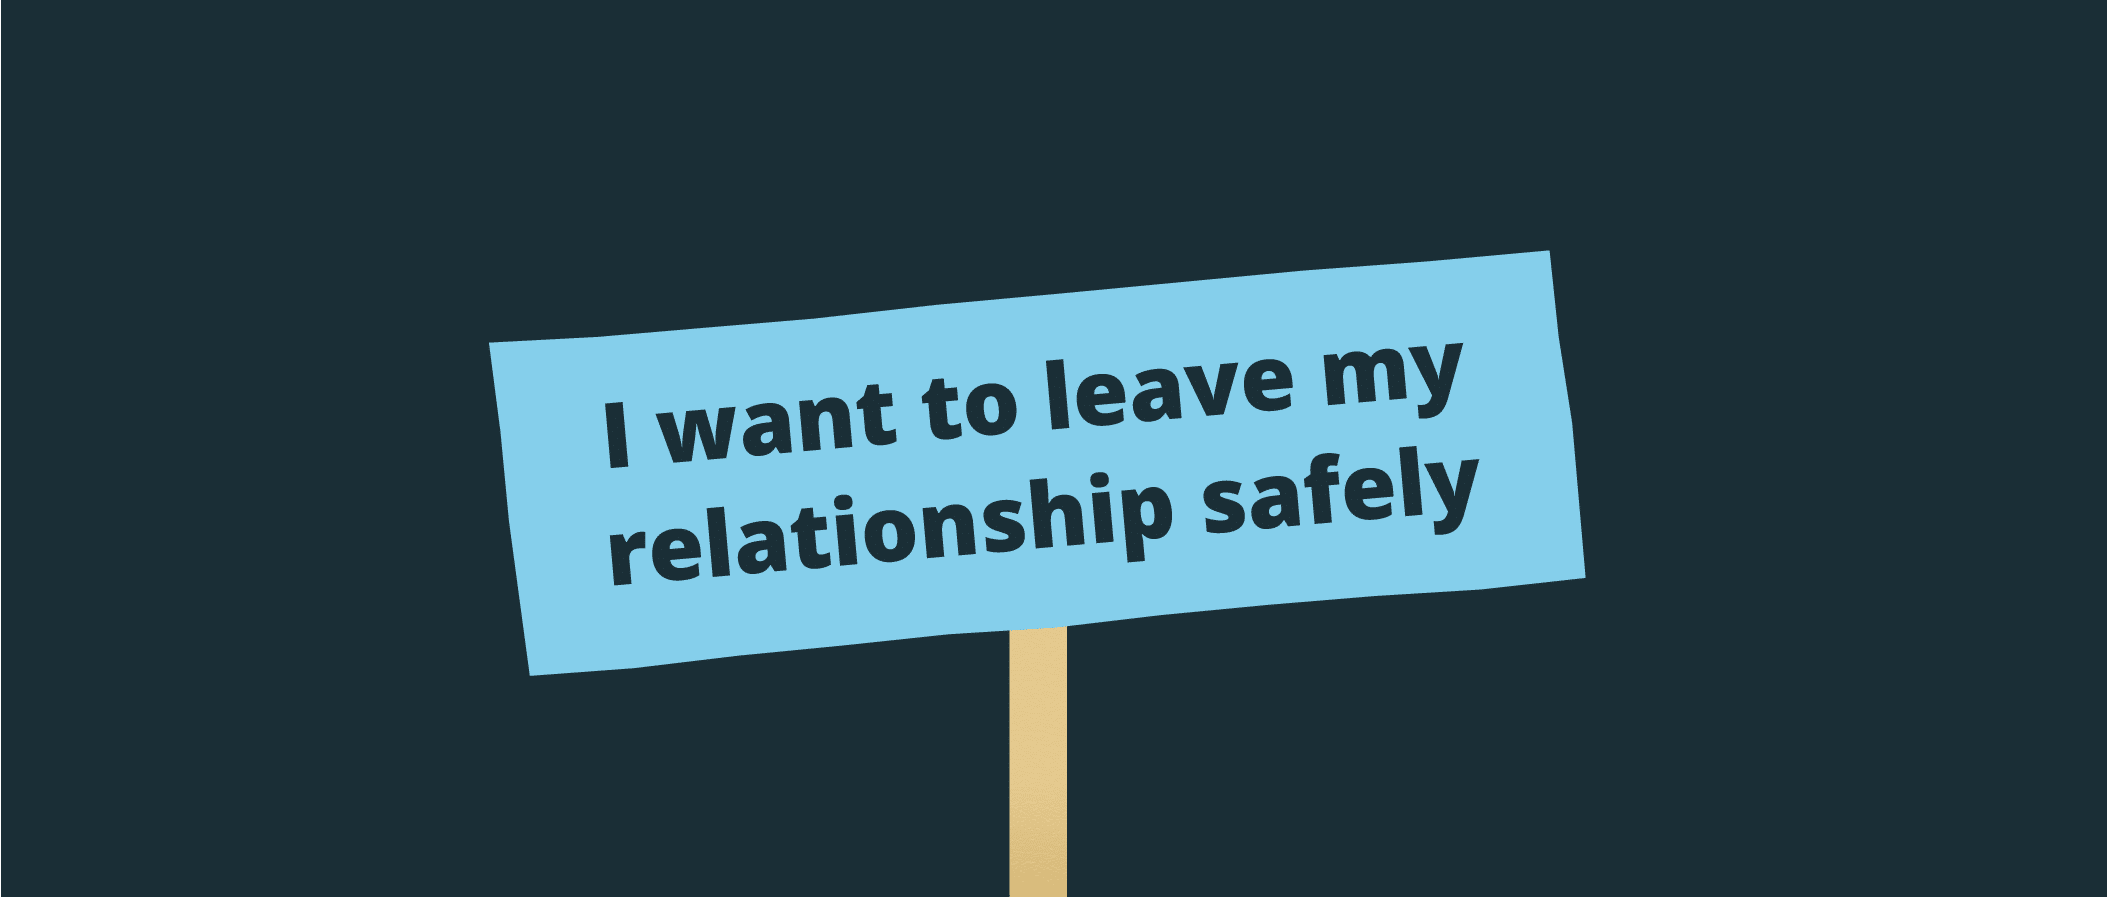 I-want-to-leave-my-relationship-safely